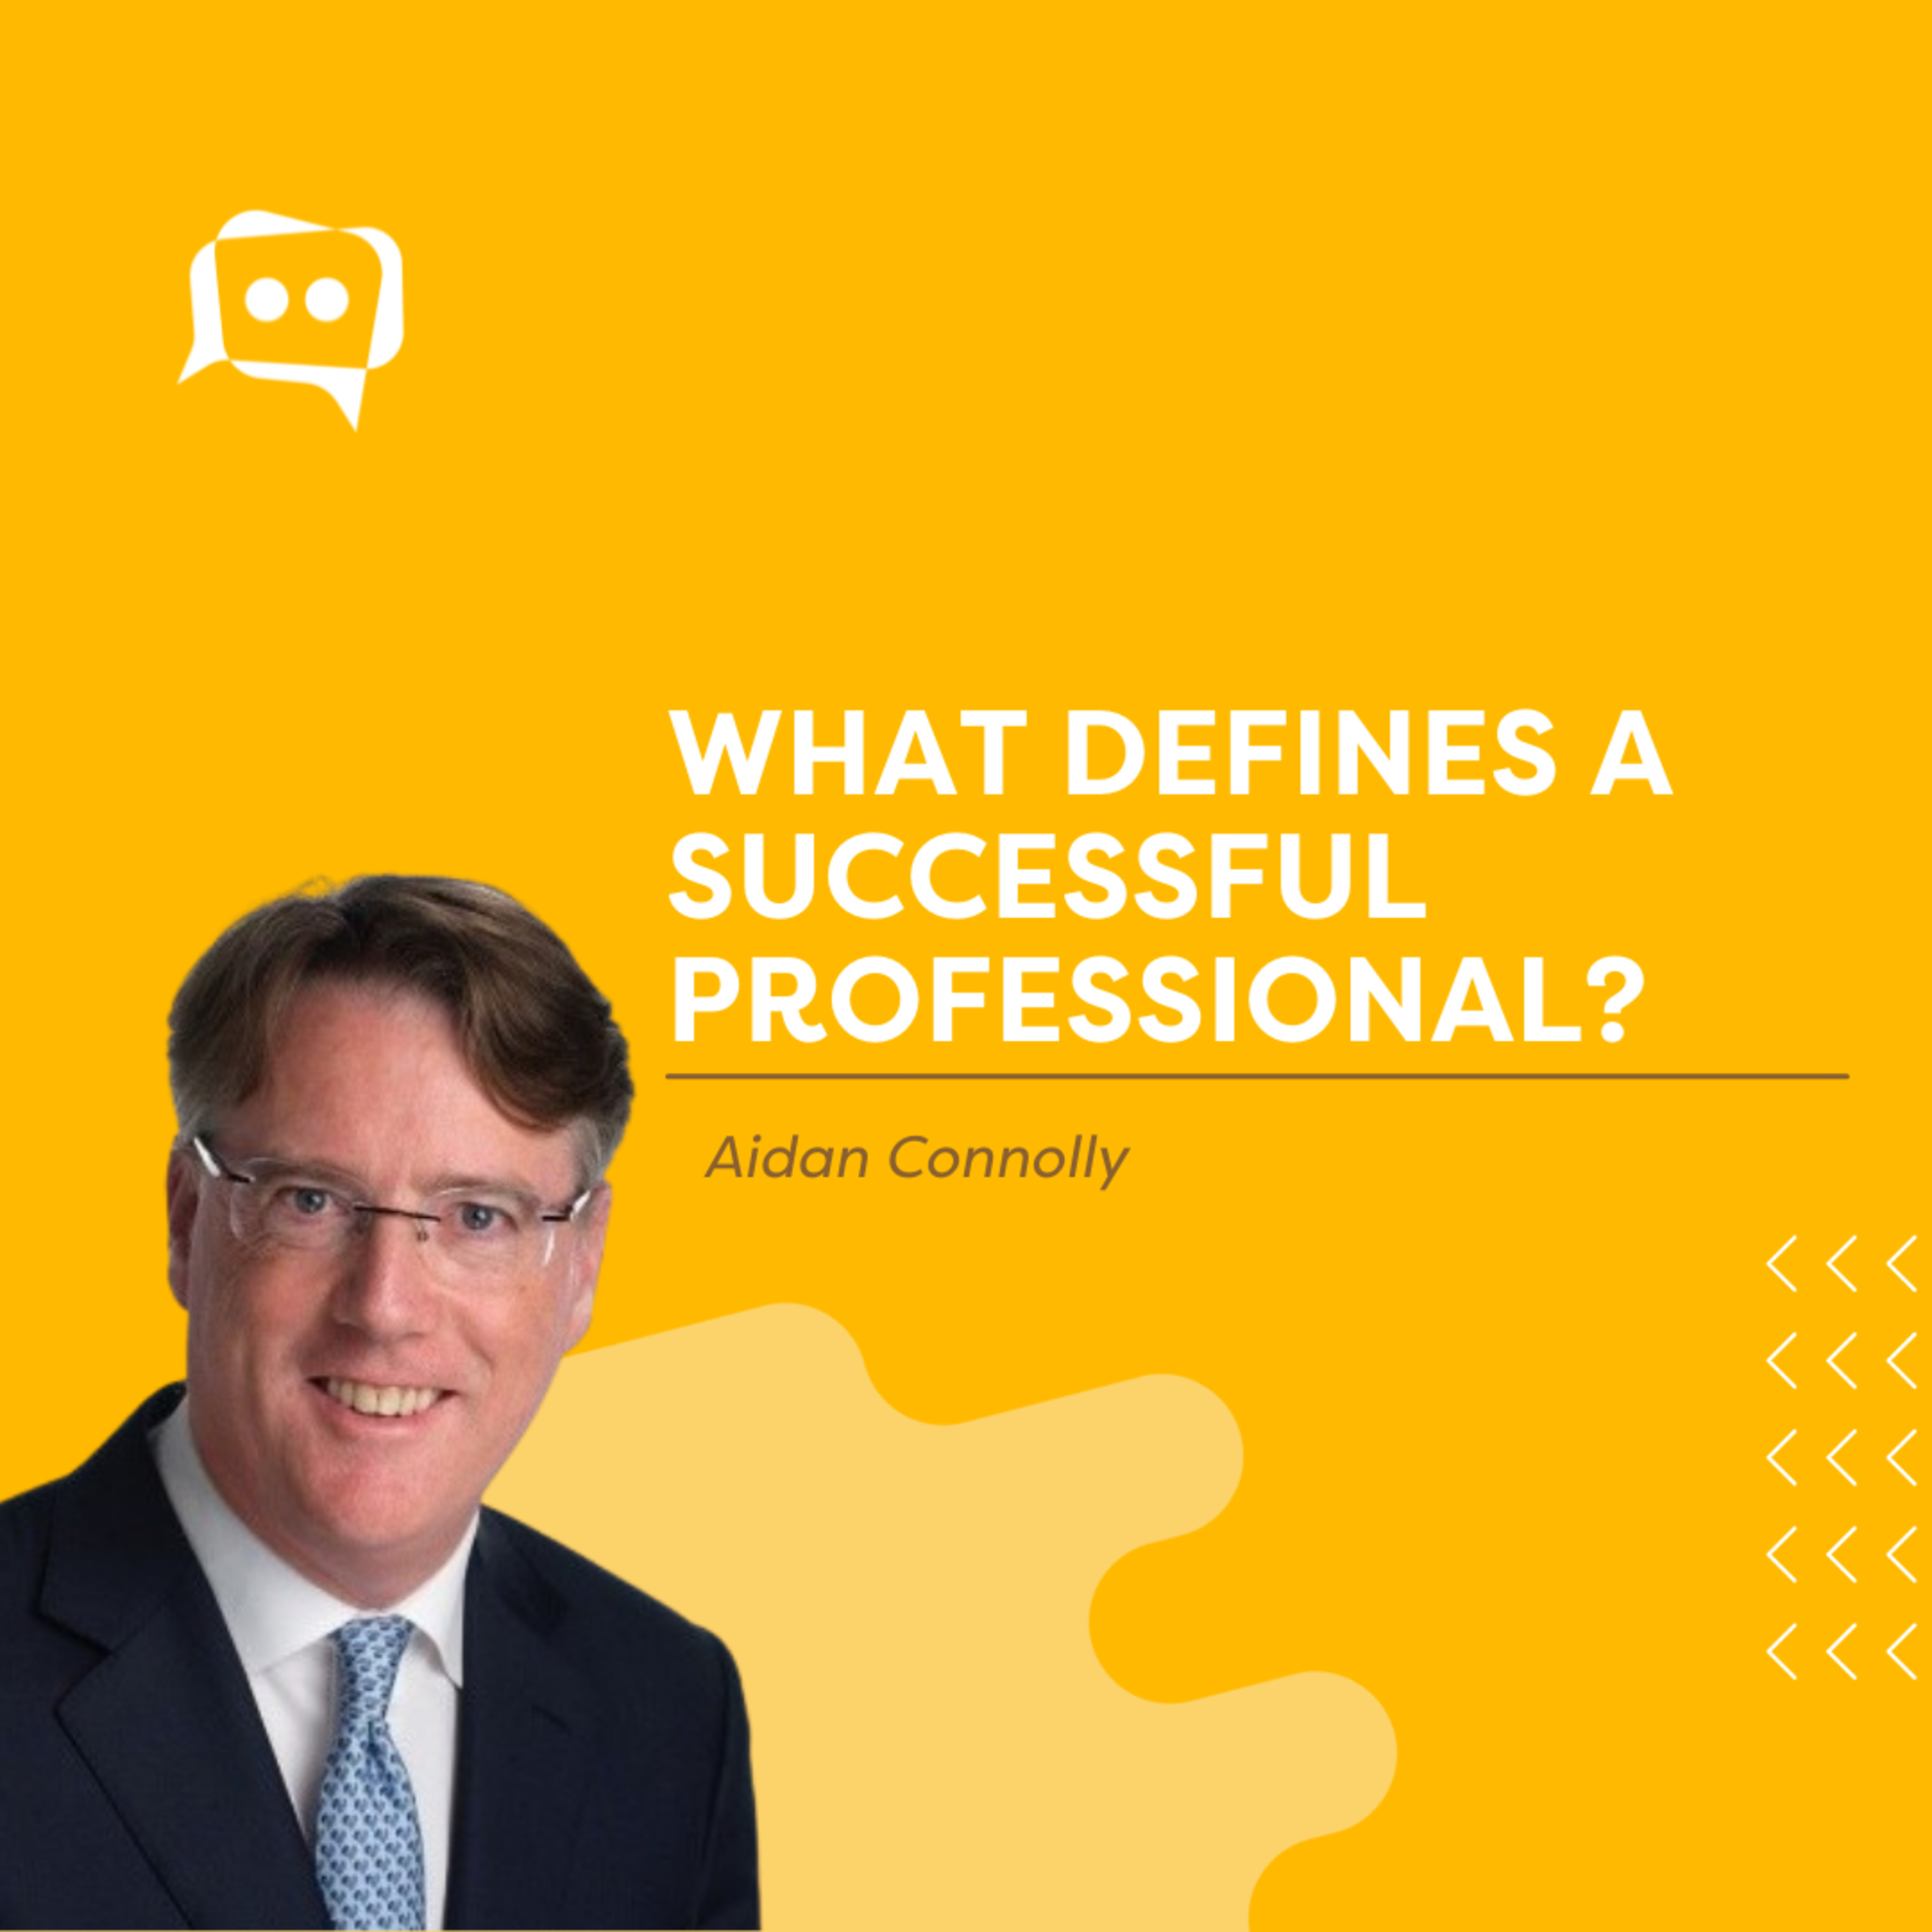 #SHORTS: What defines a successful professional? With Aidan Connolly